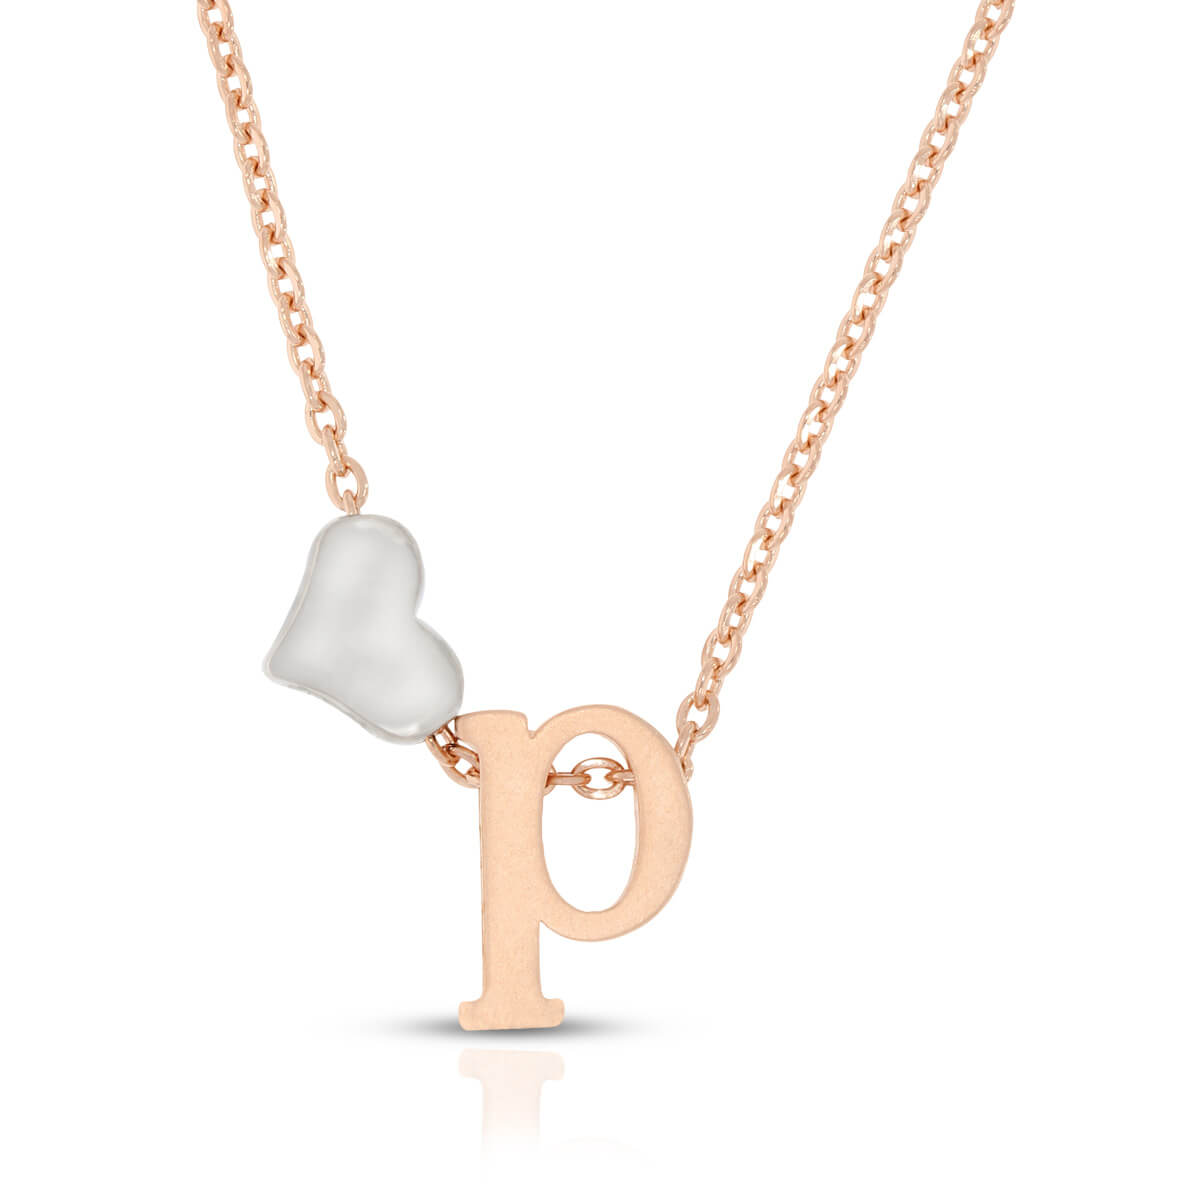 Sterling Silver "P" Initial Necklace